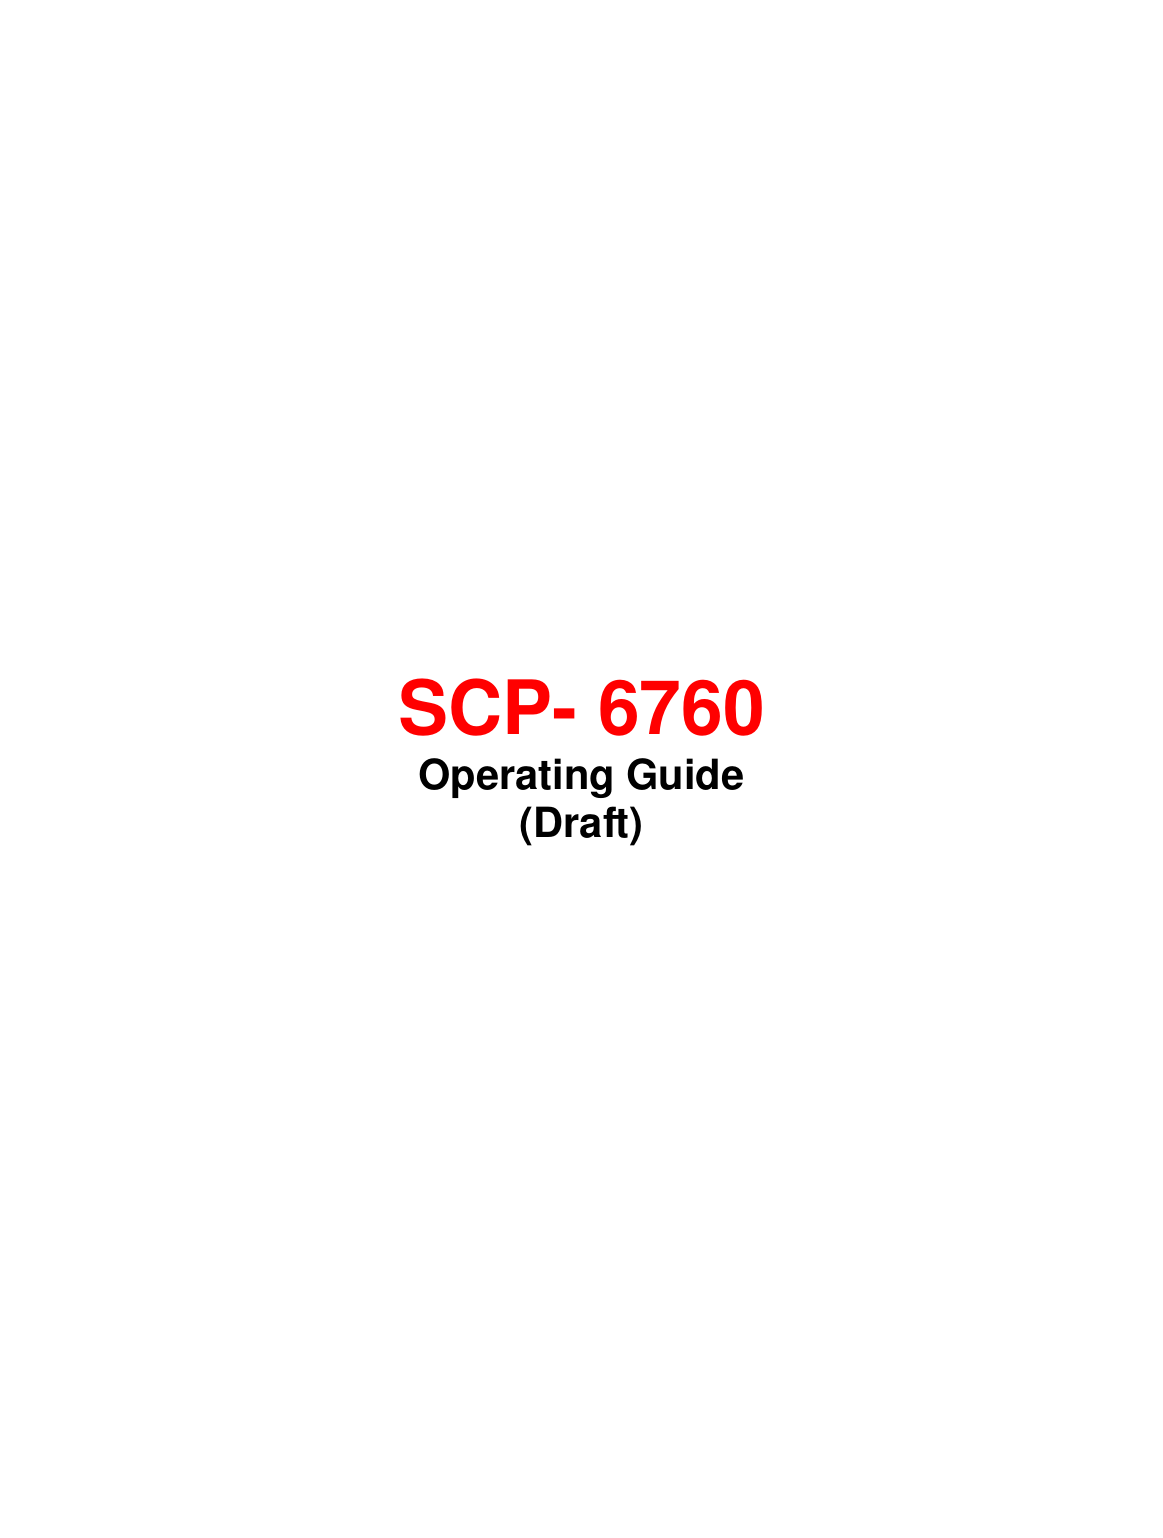                   SCP- 6760 Operating Guide (Draft) 